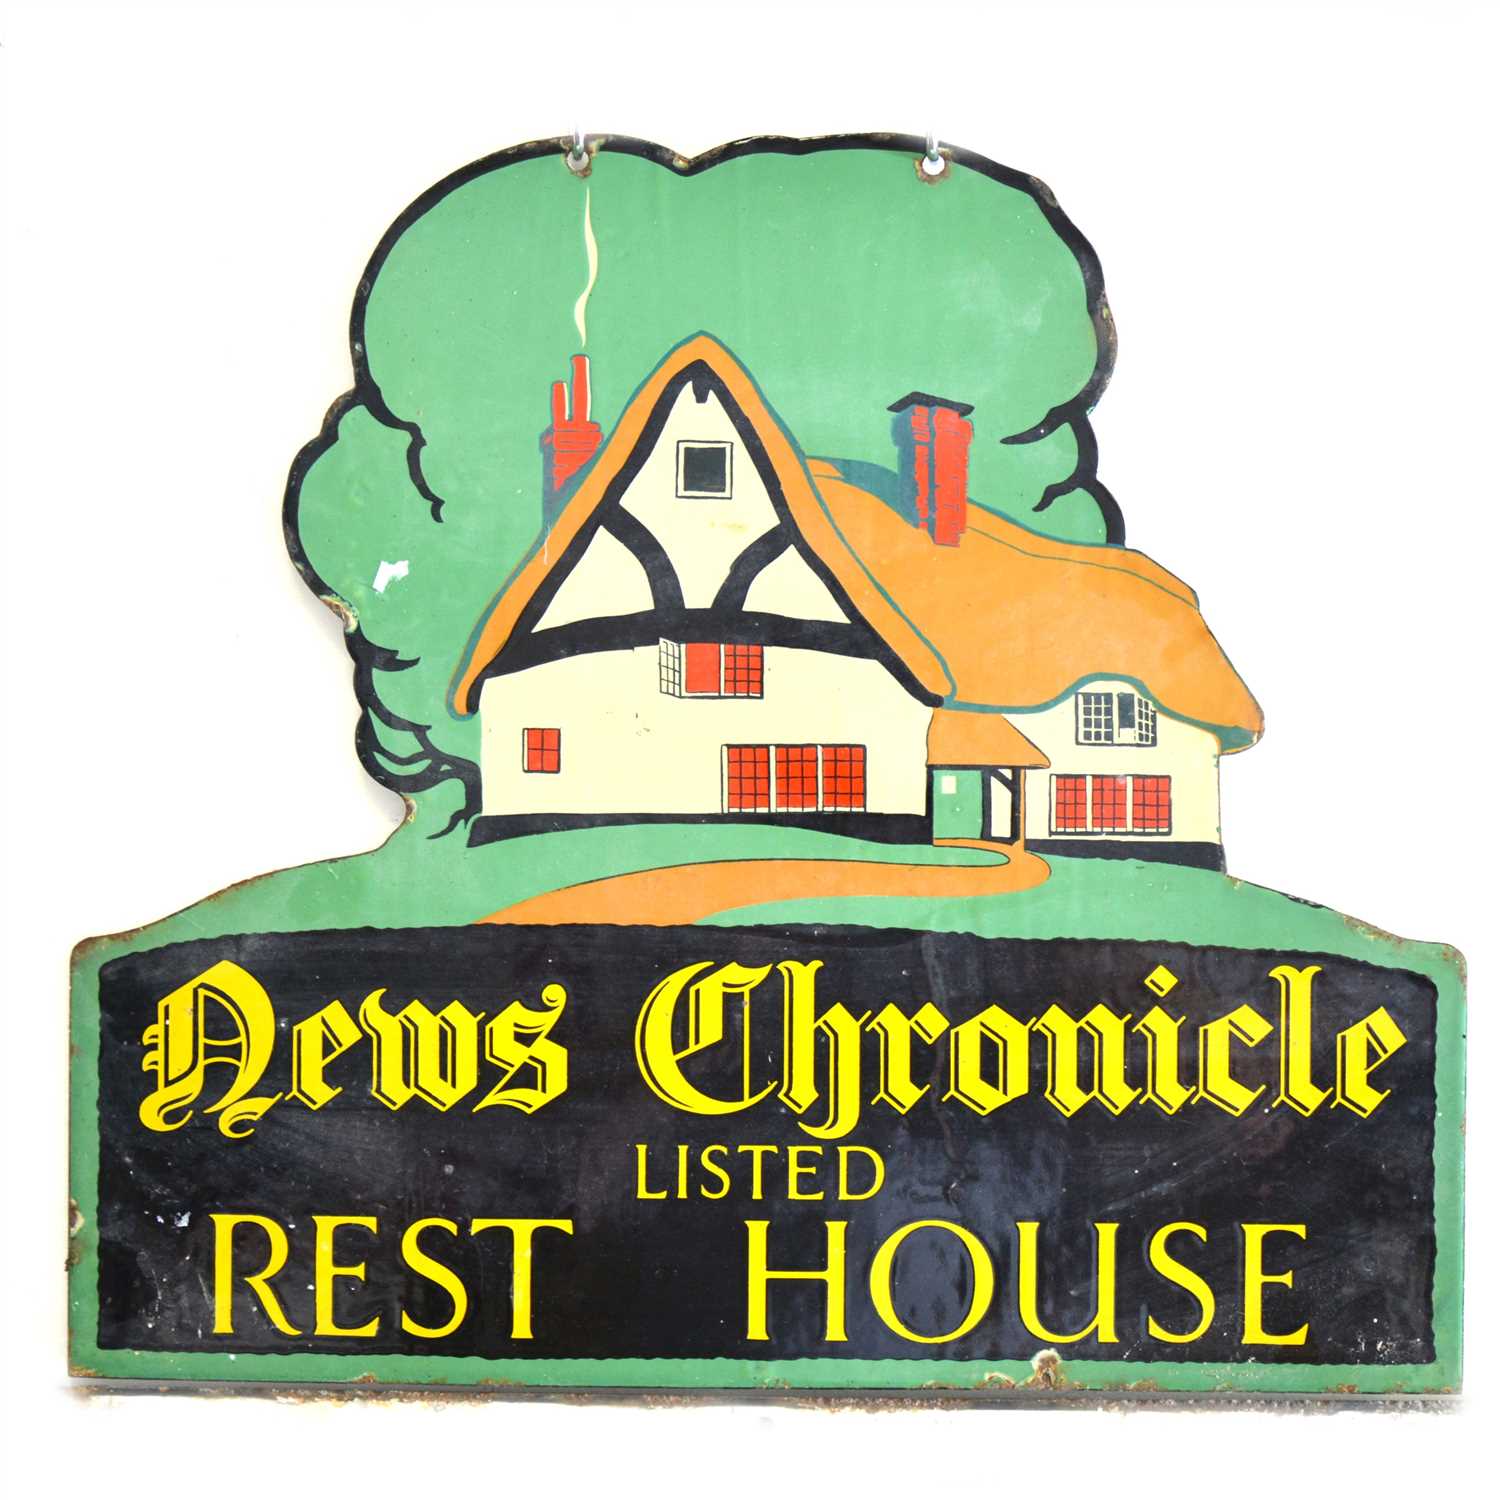 Lot 165 - A metal advertising sign for a "News Chronicle Listed Rest House"